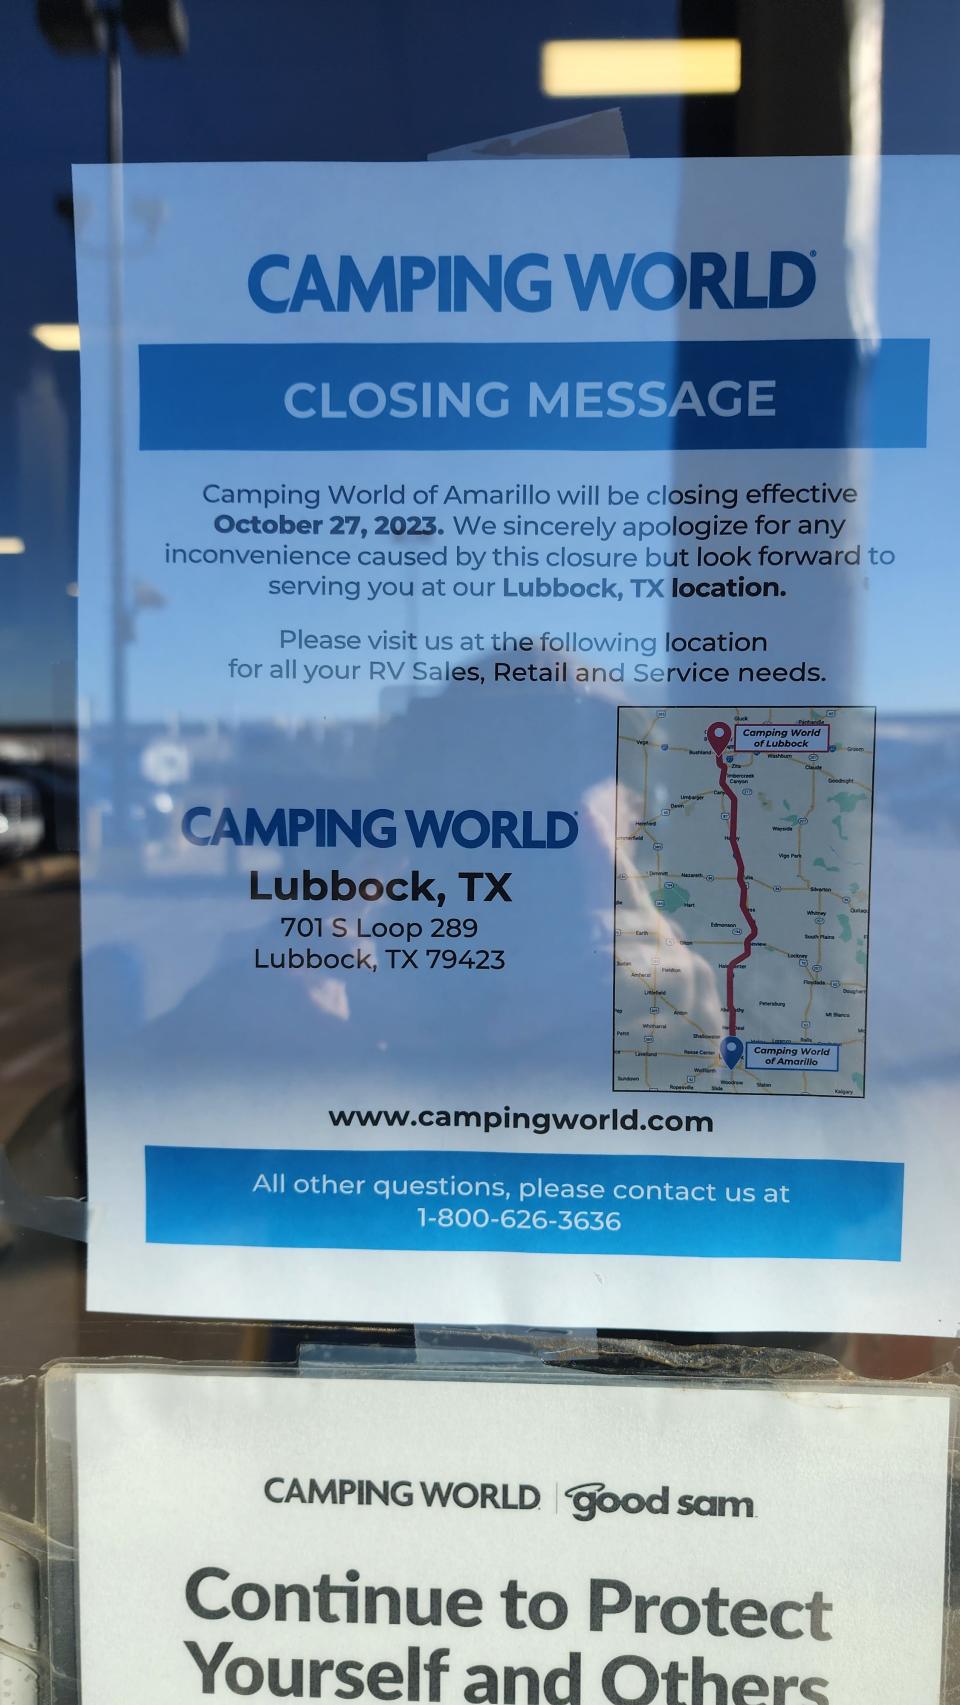 Camping World announced that its Amarillo location will permanently close Oct. 27. A sign on the door notes "We sincerely apologize for any inconvenience caused by this closure but look forward to serving you at our Lubbock, TX location."